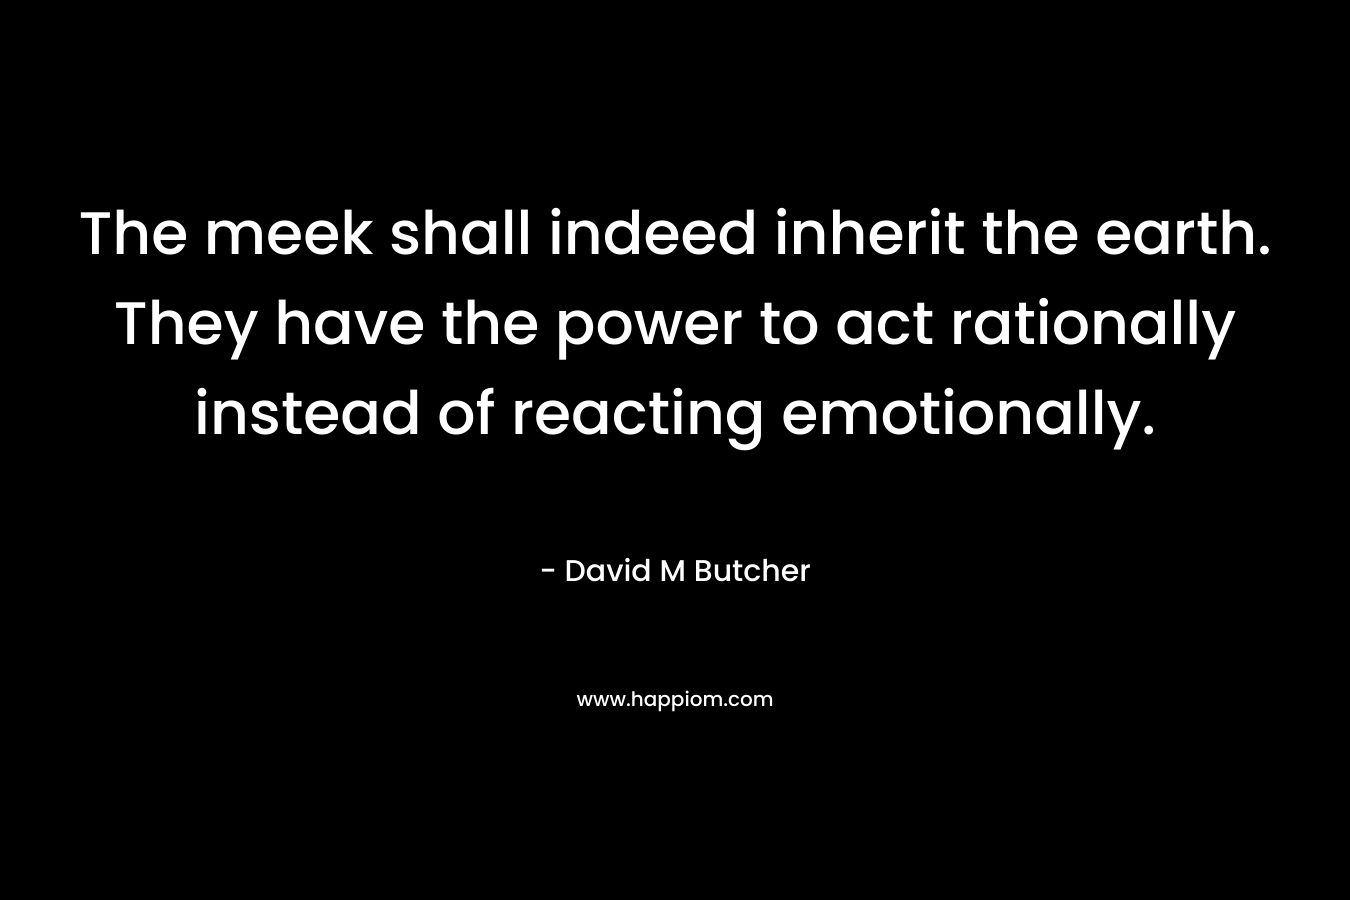 The meek shall indeed inherit the earth. They have the power to act rationally instead of reacting emotionally.